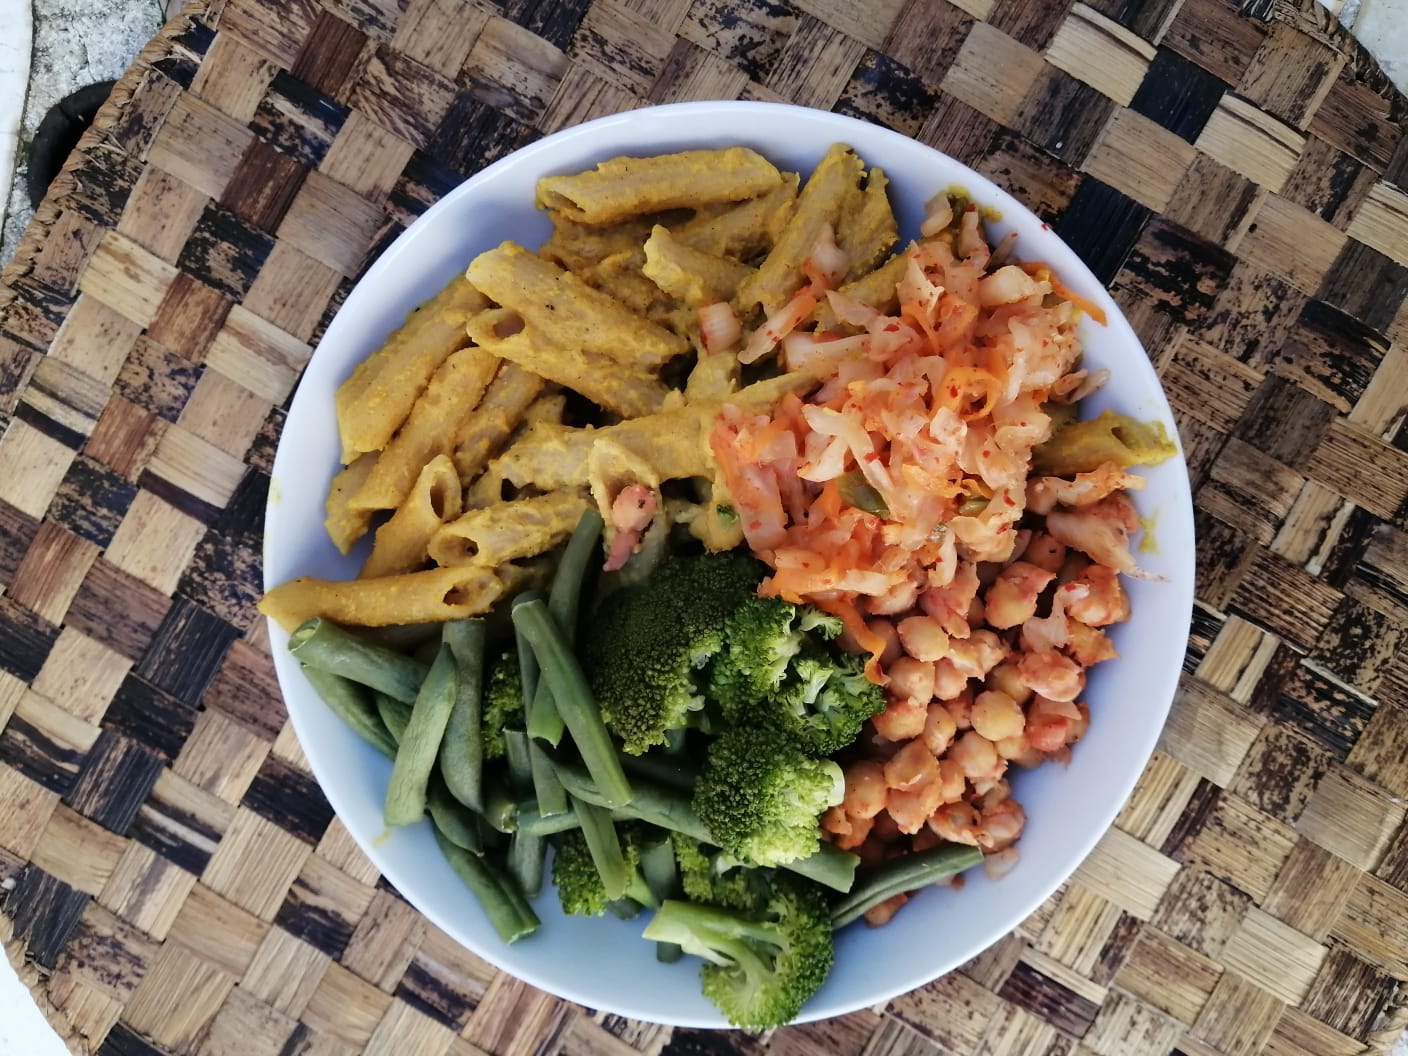 I call it "mac 'n greens" and it's one of my favourite lunches to batch cook for the week. Wholewheat pasta, "cheese" sauce, blanched green veg, chickpeas and homemade kimchi-style kraut